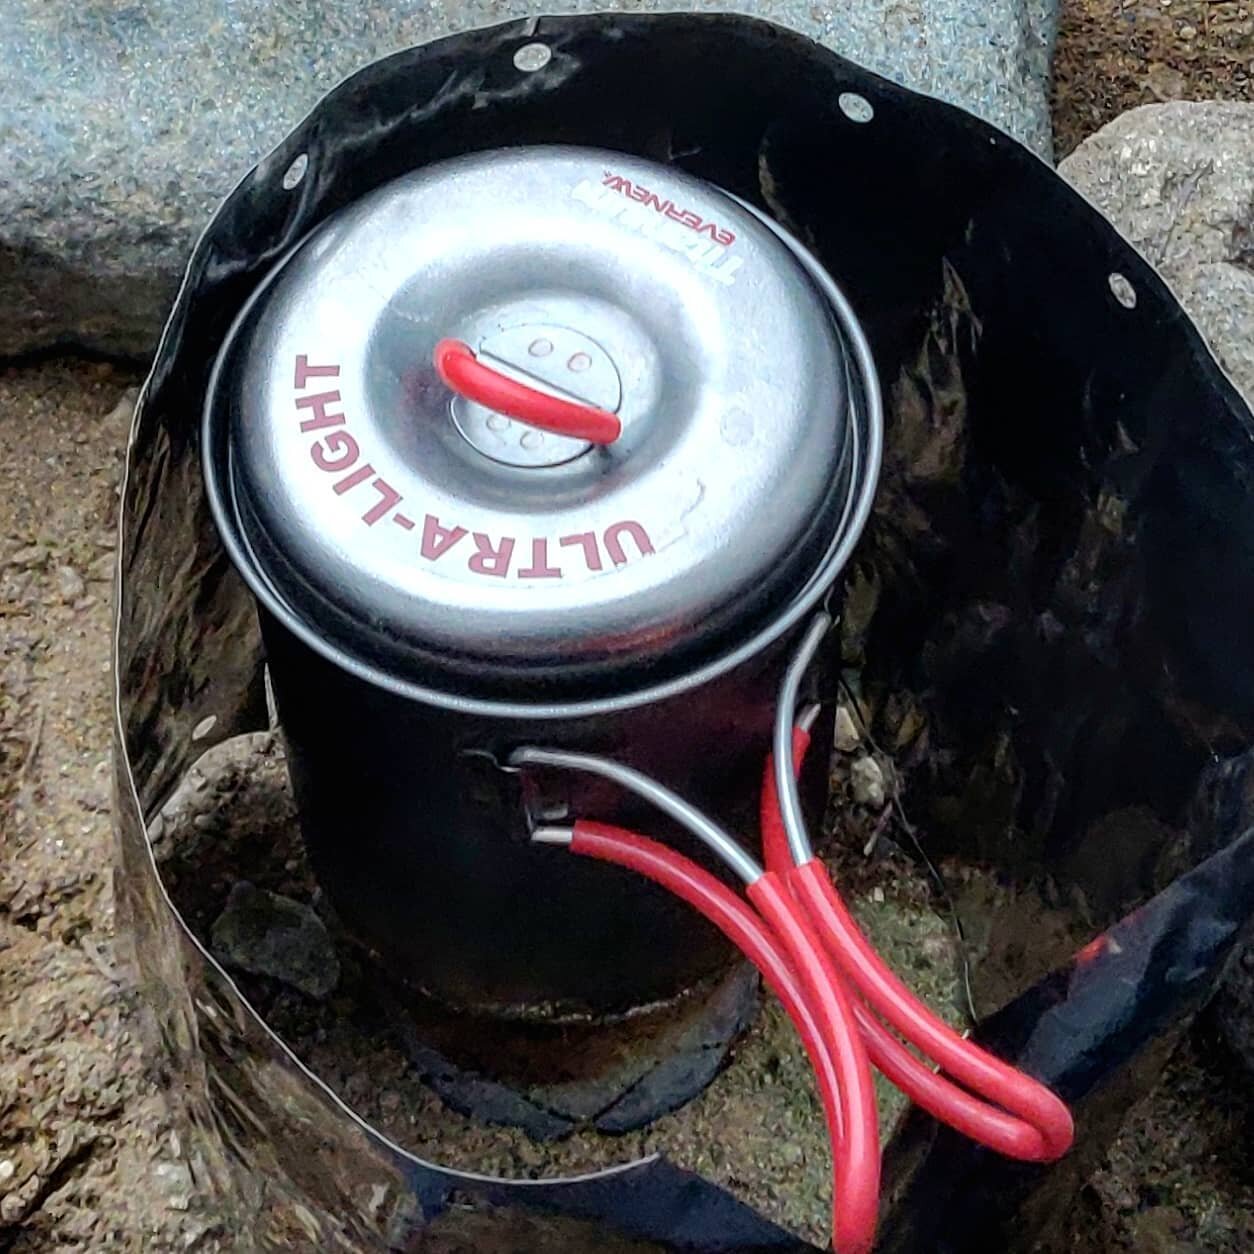 What's your stove system? Mine weight 250g

#evernew #evernewtitanium #alchoolstove 
#japanesebrand #outdoorjapan #outdoorgear